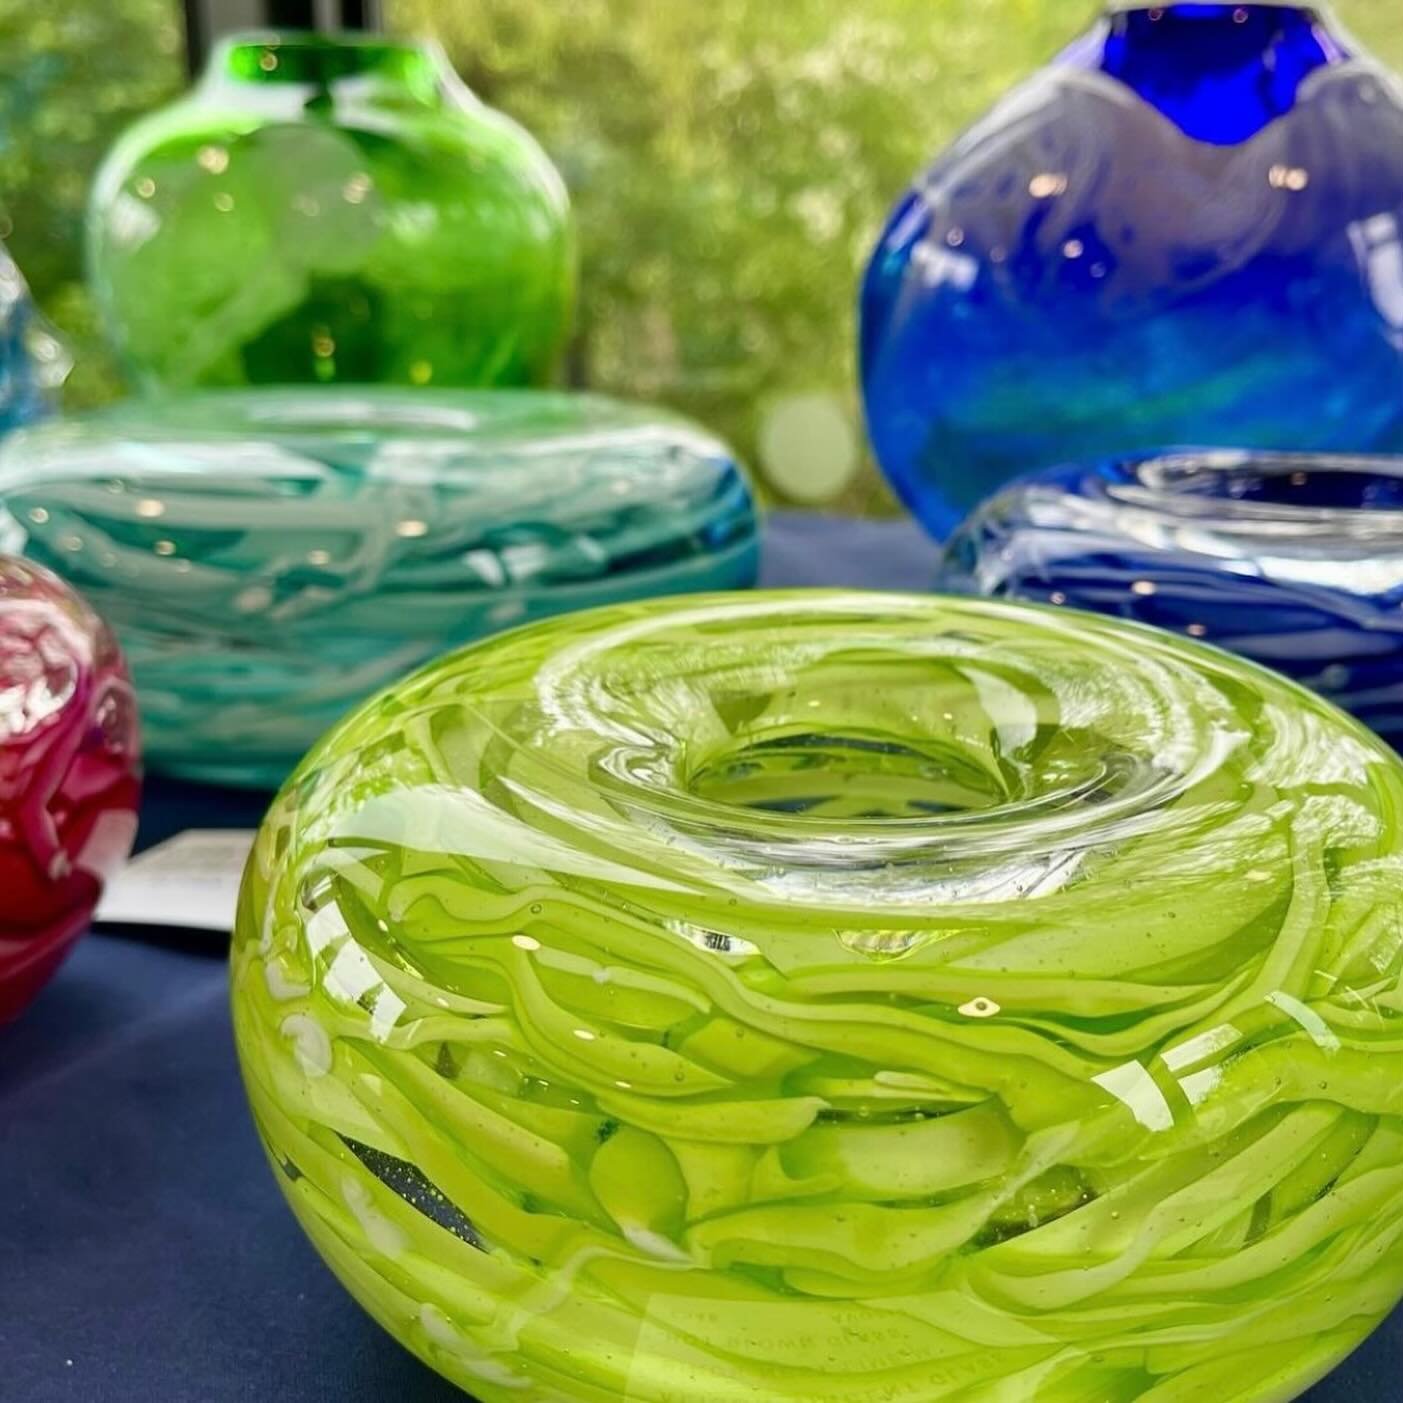 Last day - open until 4pm. @riverandrowingmuseum Henley - venue 5 in the @henleyartstrail - to see my glass and stunning work of 8 other talented artists across various media. 

My Glass Art Inspired by Wilderness will be at Venue 5 River &amp; Rowin